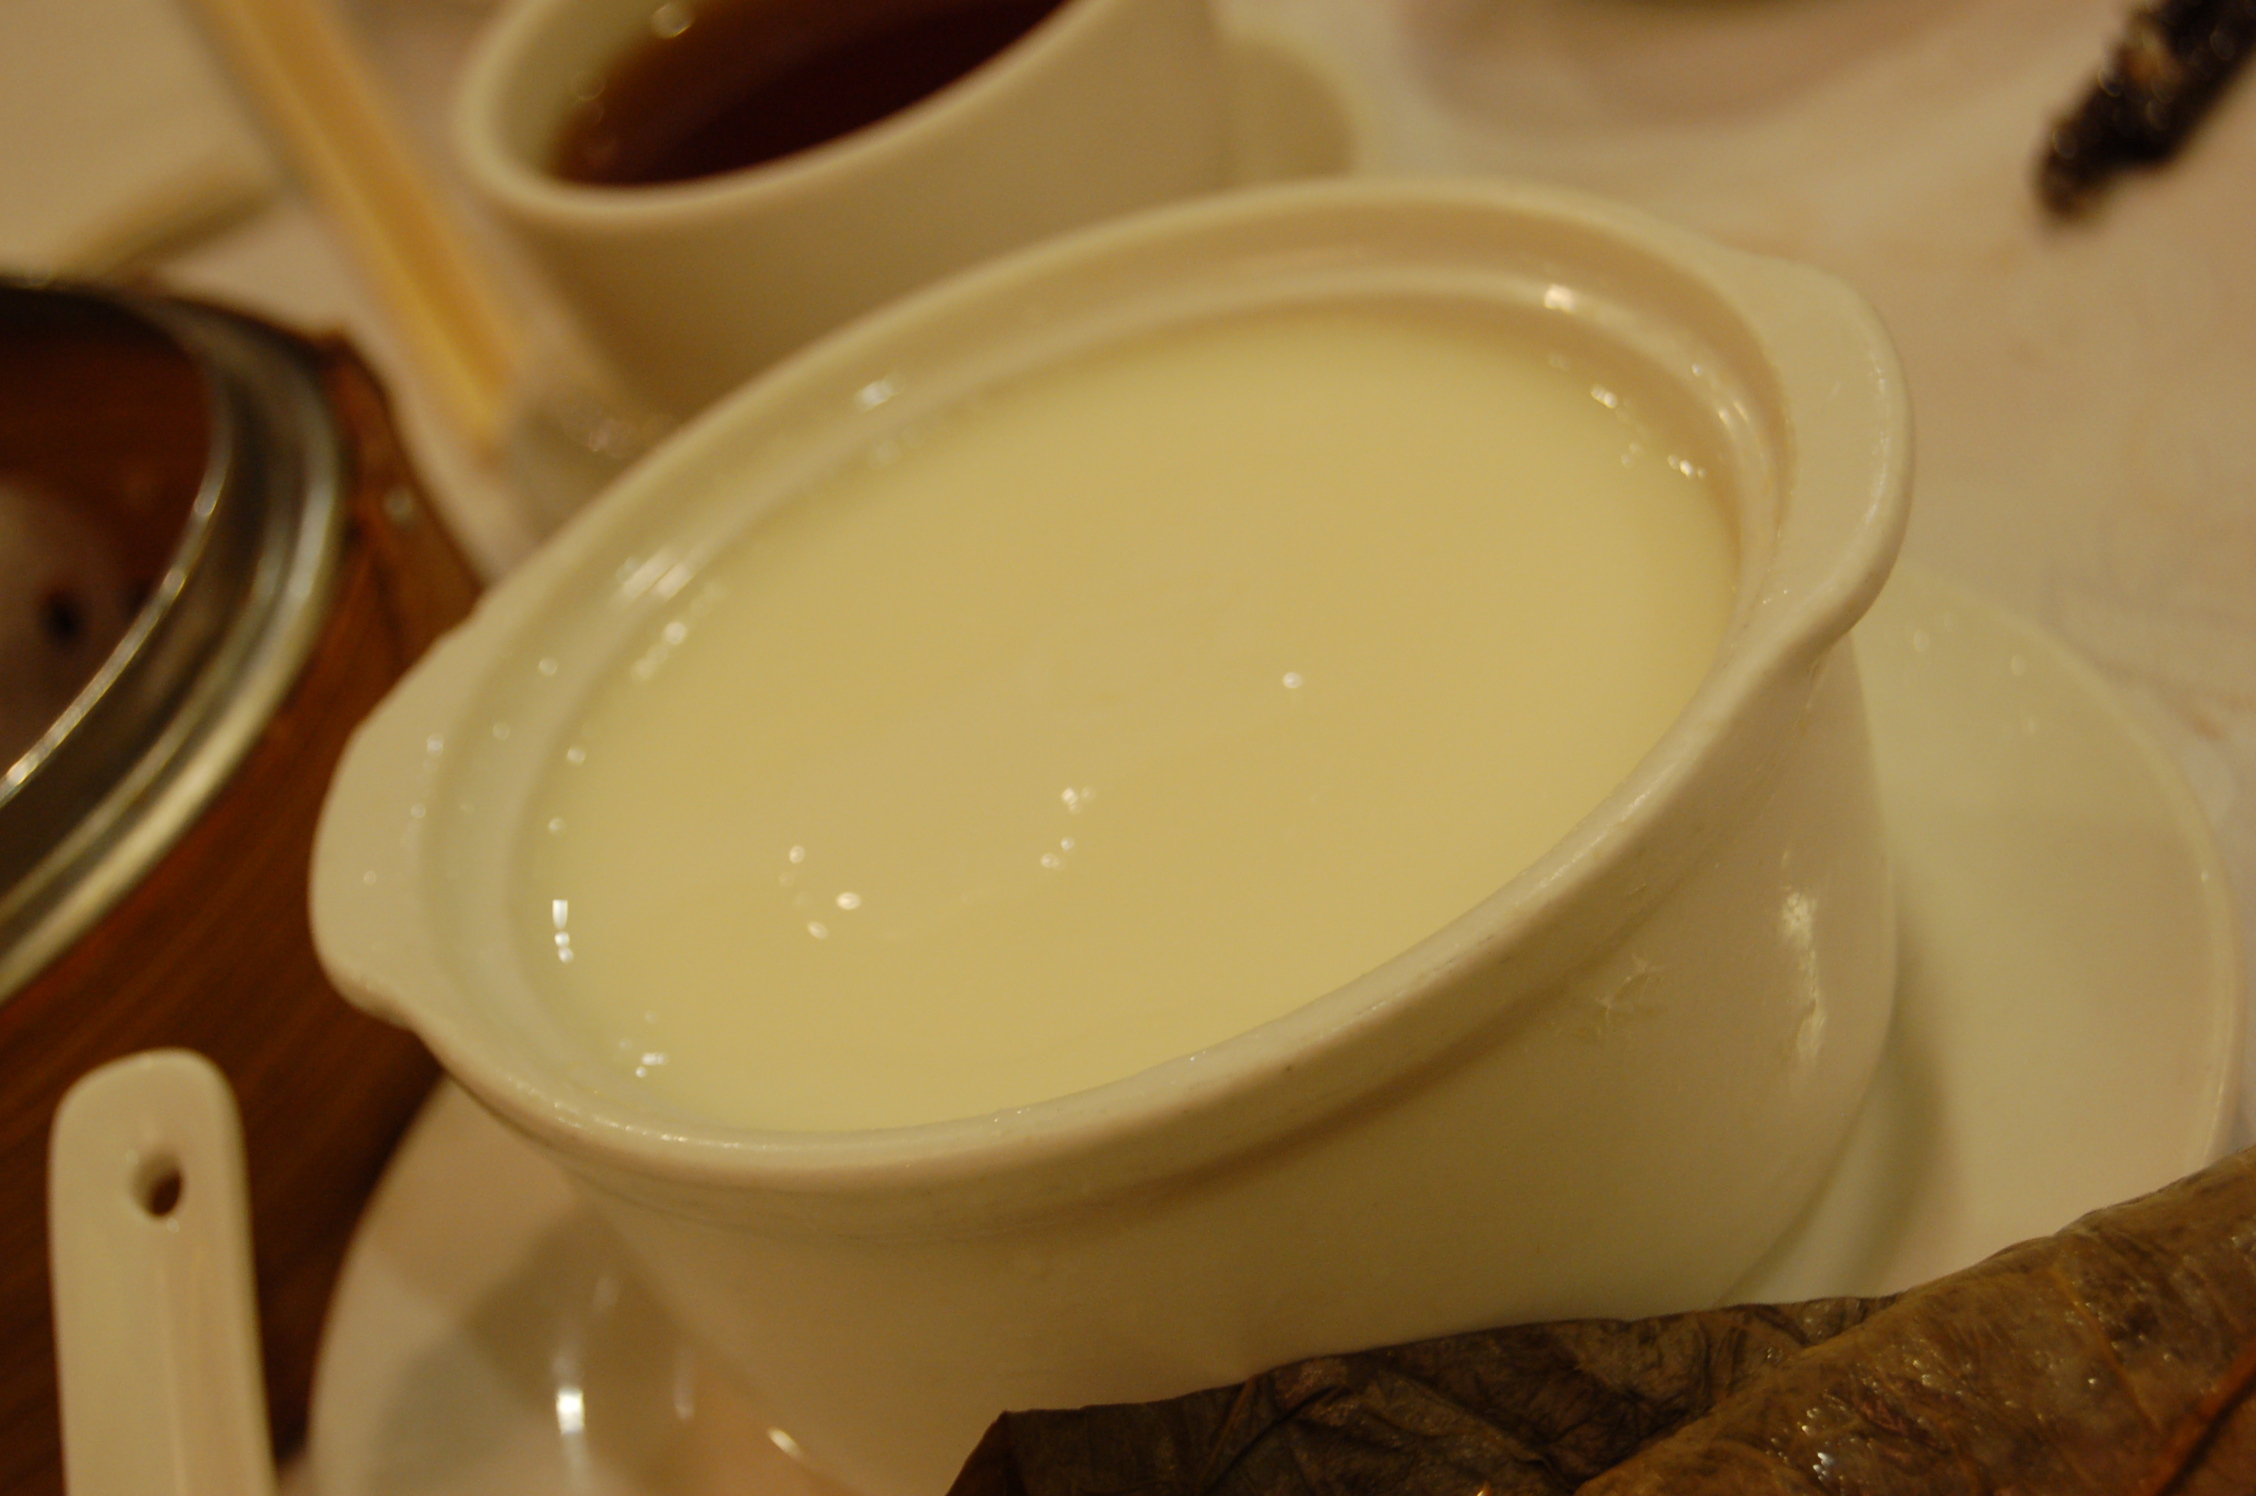 a bowl of cream is placed next to two plates